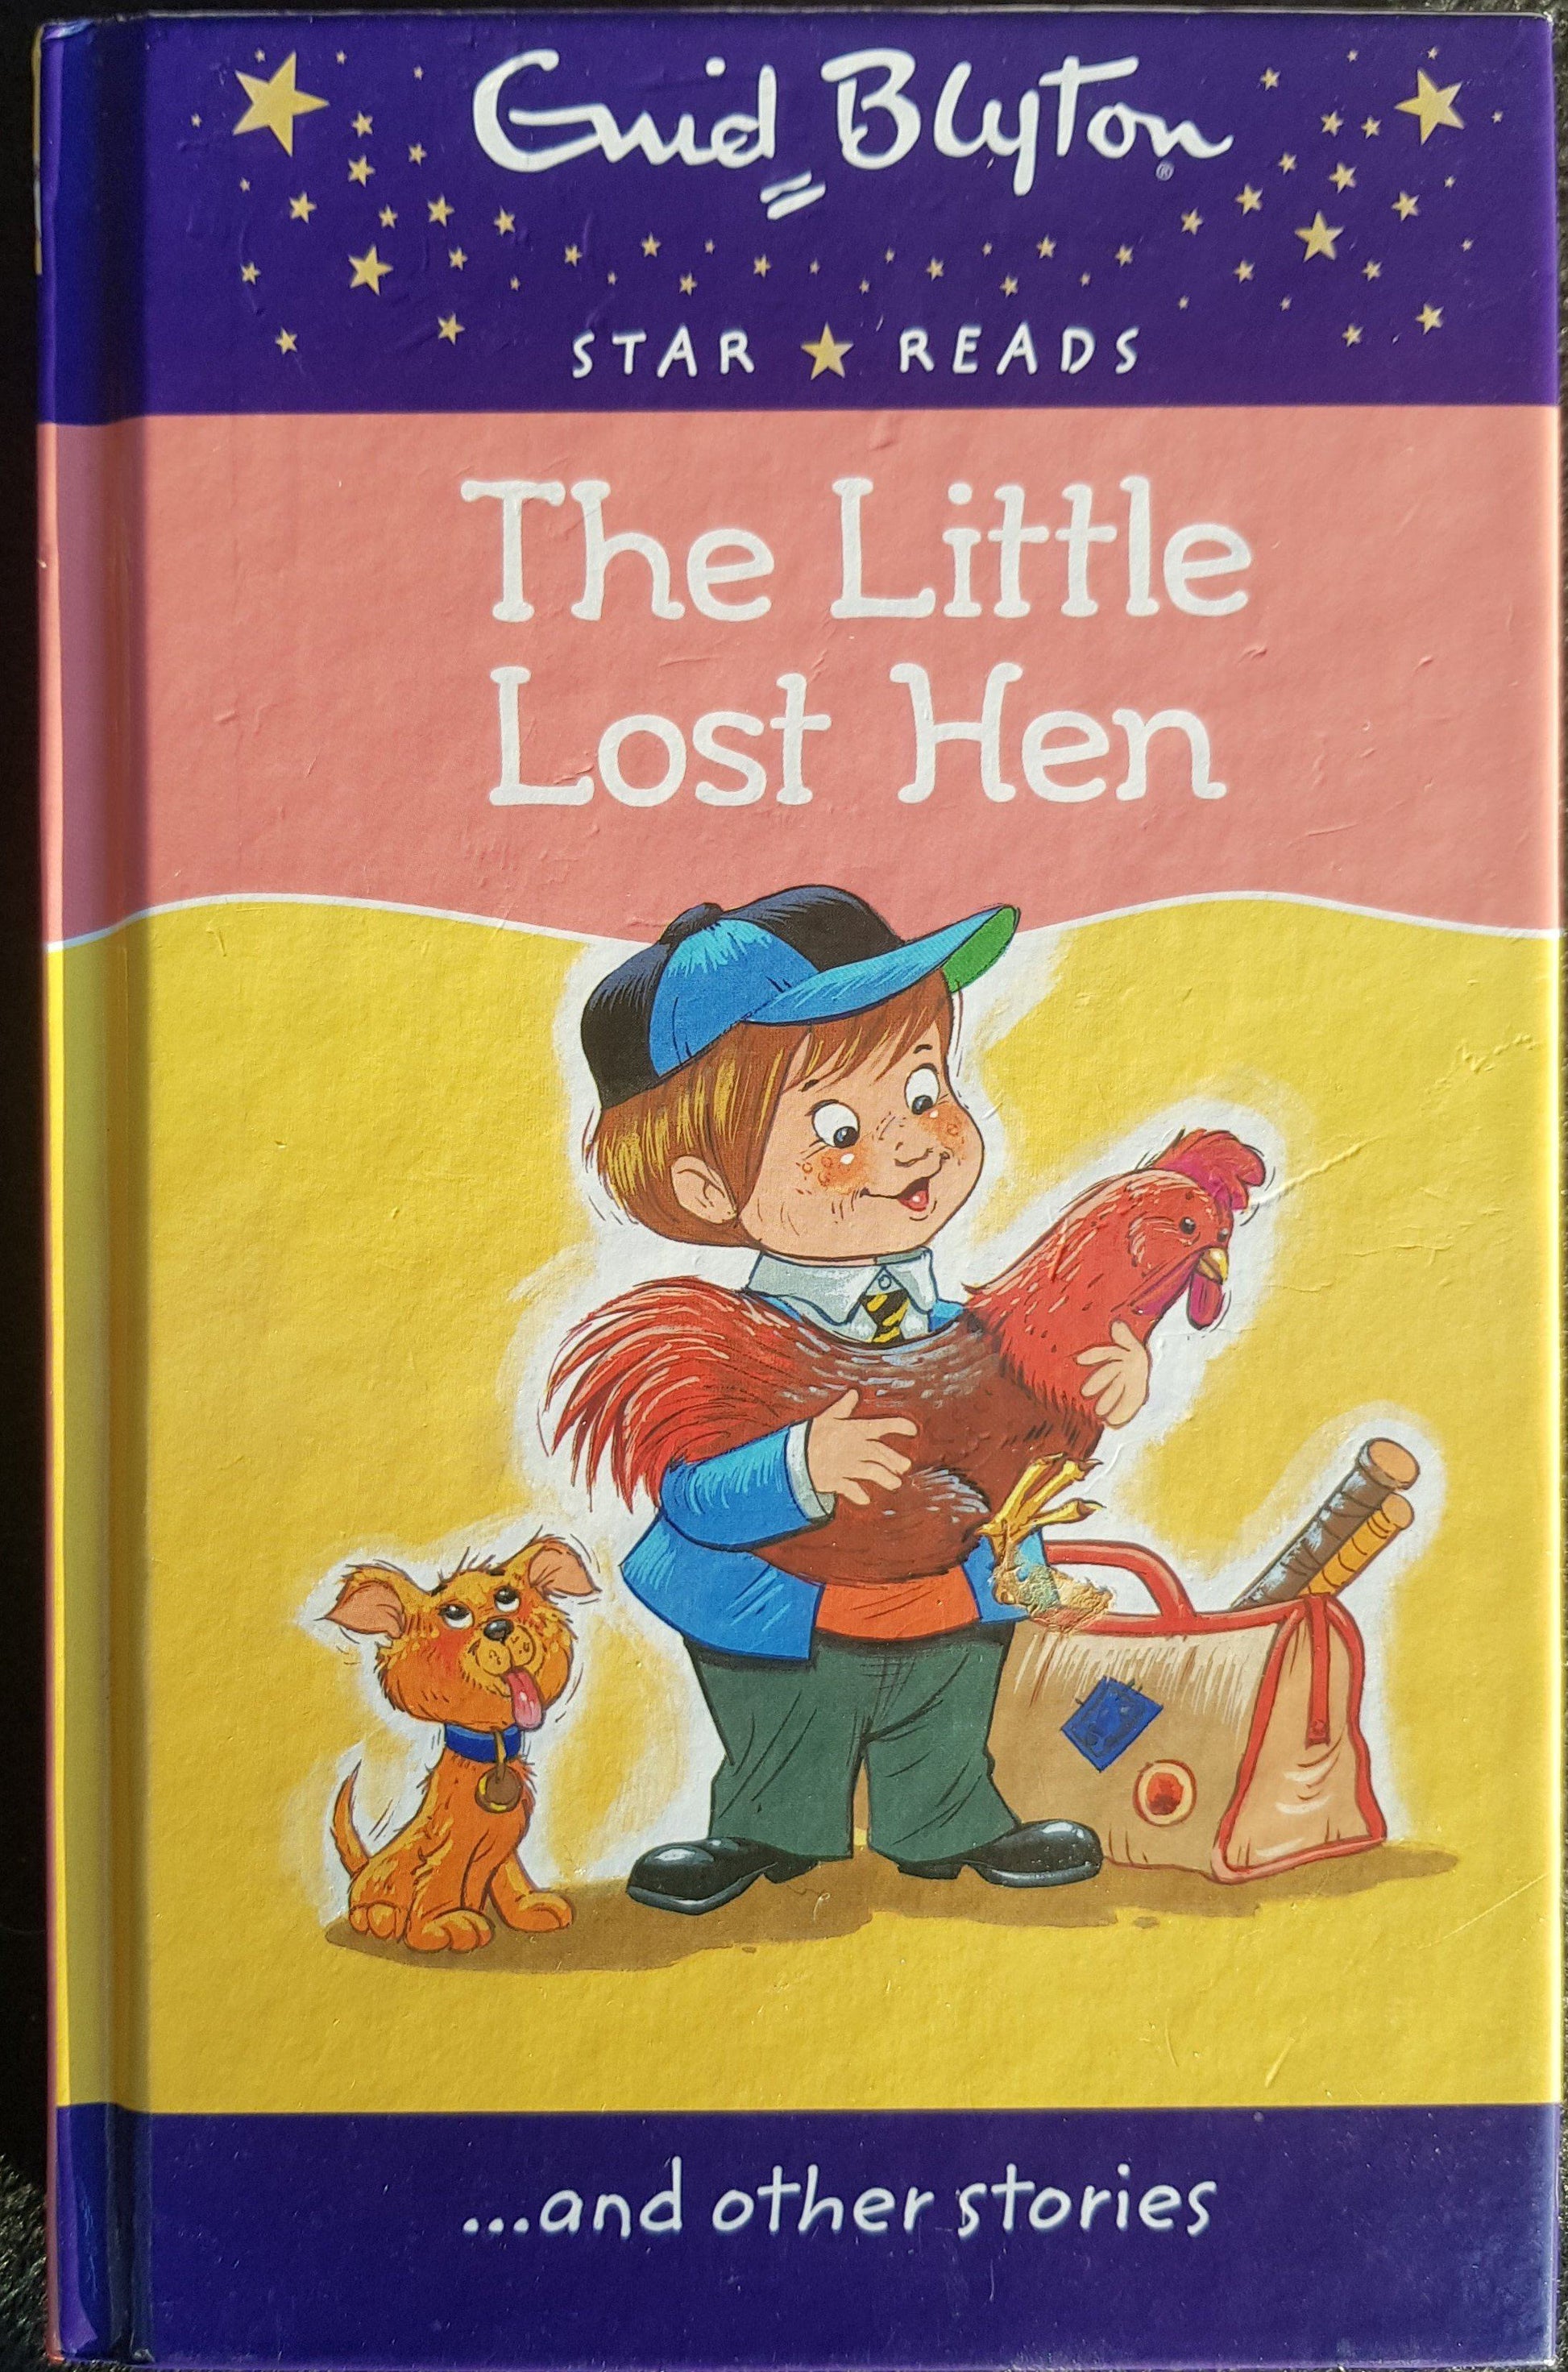 The Little Lost Hen and Other Stories Like New Enid Blyton  (4616187117623)